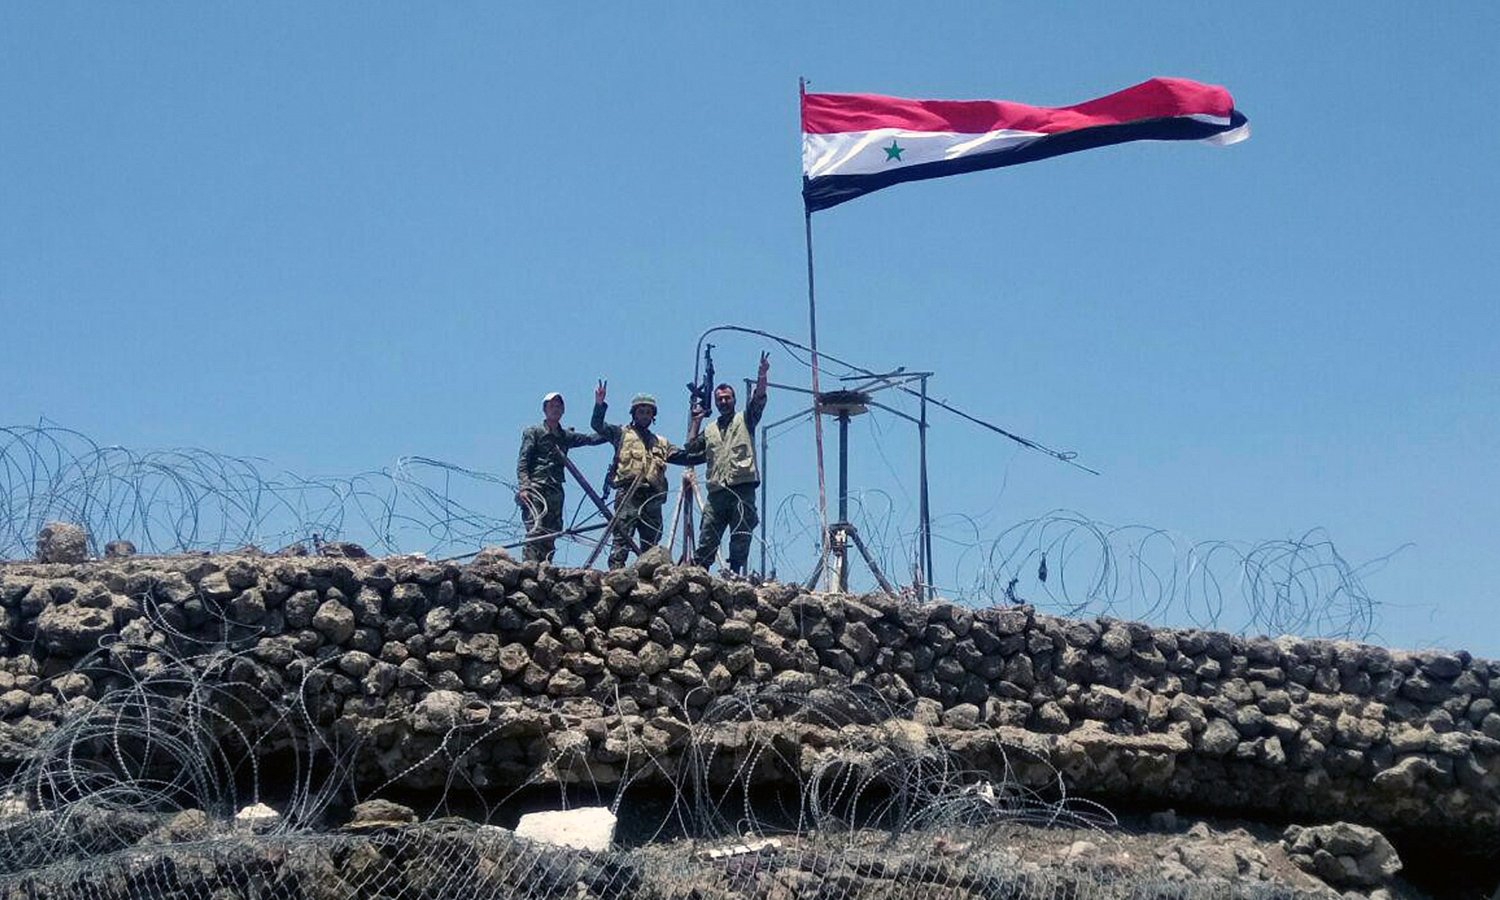 Regime forces soldiers making the victory sign next to the Syrian regime's flag in Tell al-Harrah on the highest hill in the southwestern governorate of Daraa - July (AFP)